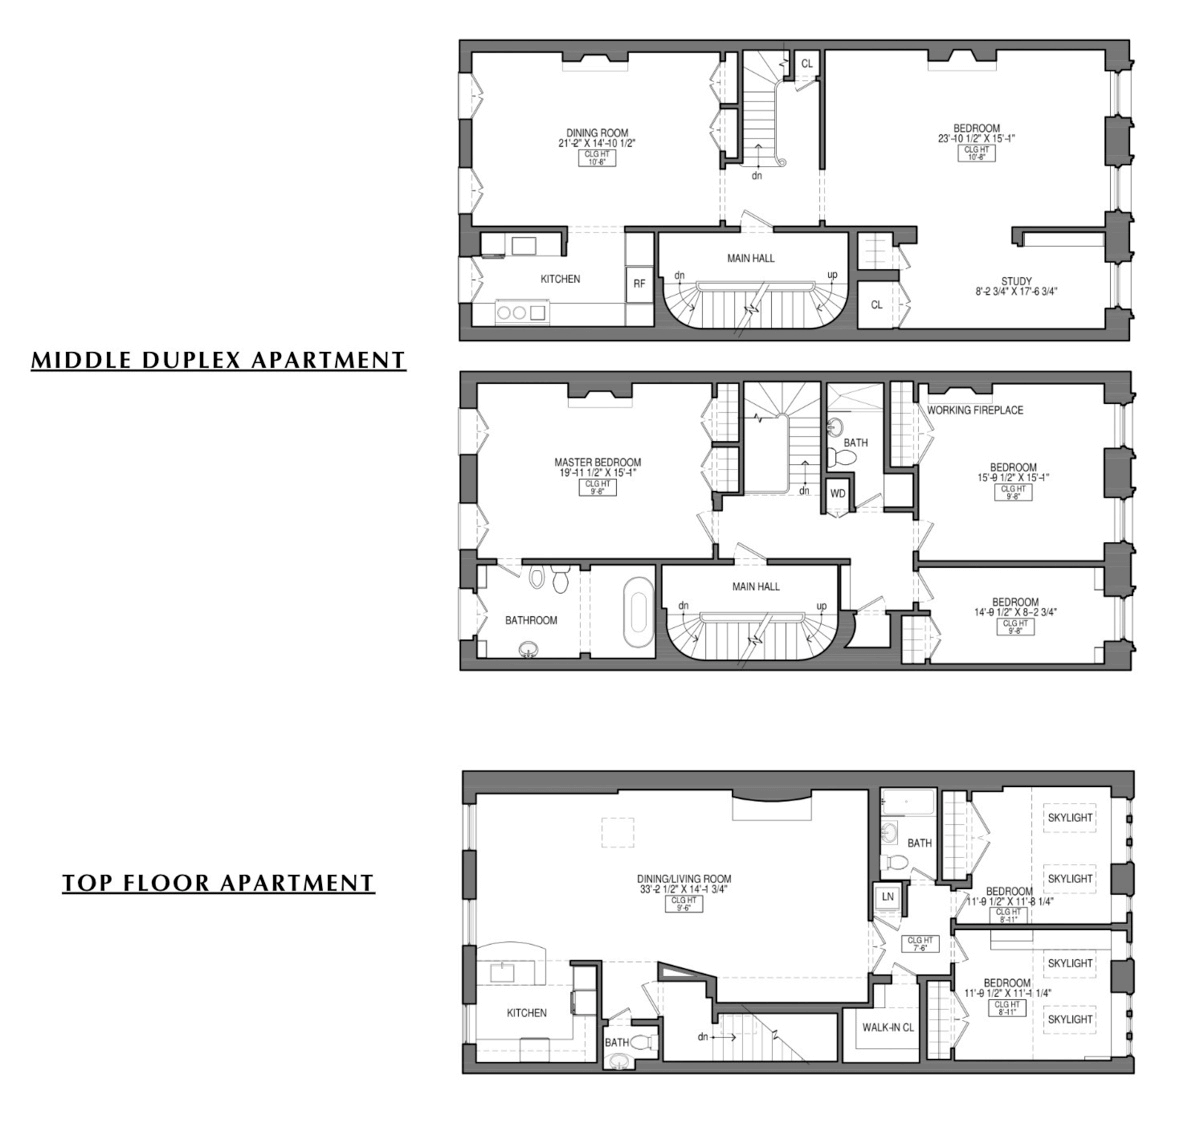 floor plan for the middle duplex with three bedrooms and the top floor two bed rental